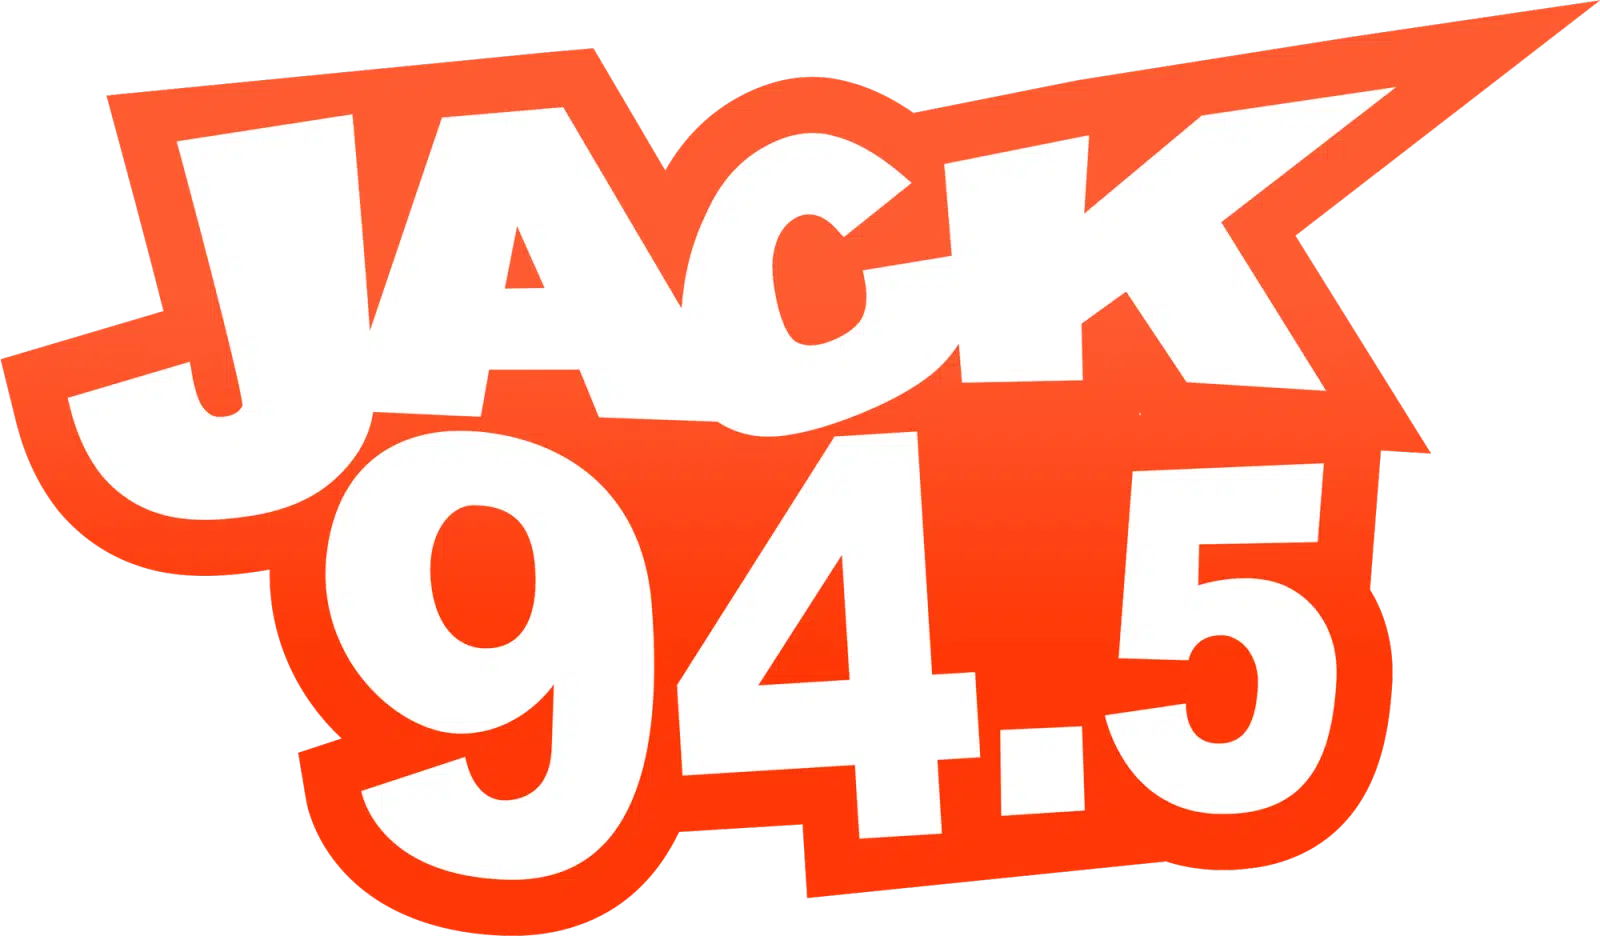 Click to go to the JACK 94-5 Website